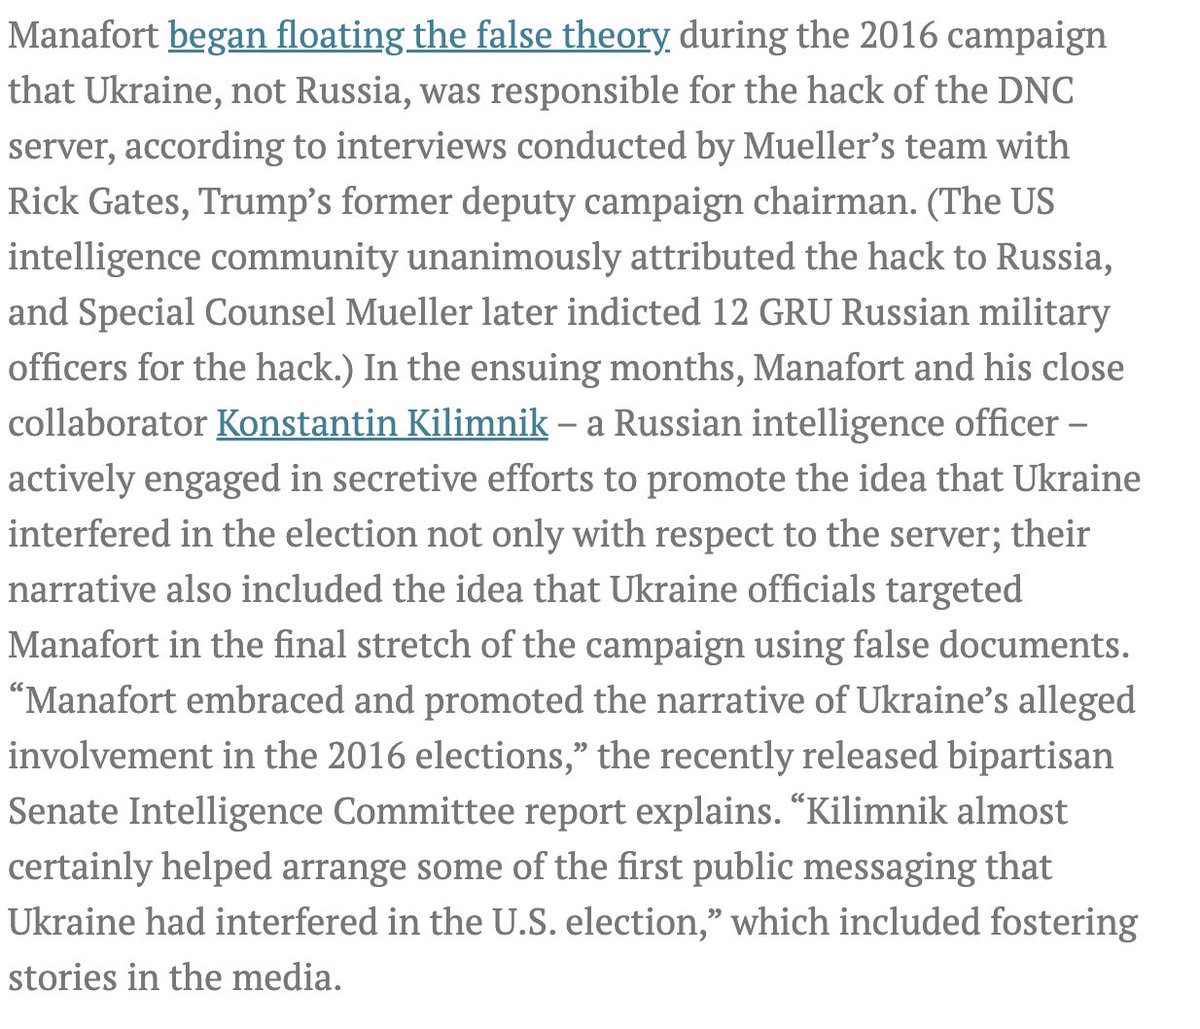 Since Trump is planning to bring back characters from Season 1 into his campaign, reupping this piece that @rgoodlaw and I wrote for @just_security back in 2020: Don't forget that Manafort began floating the conspiracy theory that Ukraine, not Russia, interfered in the 2016…